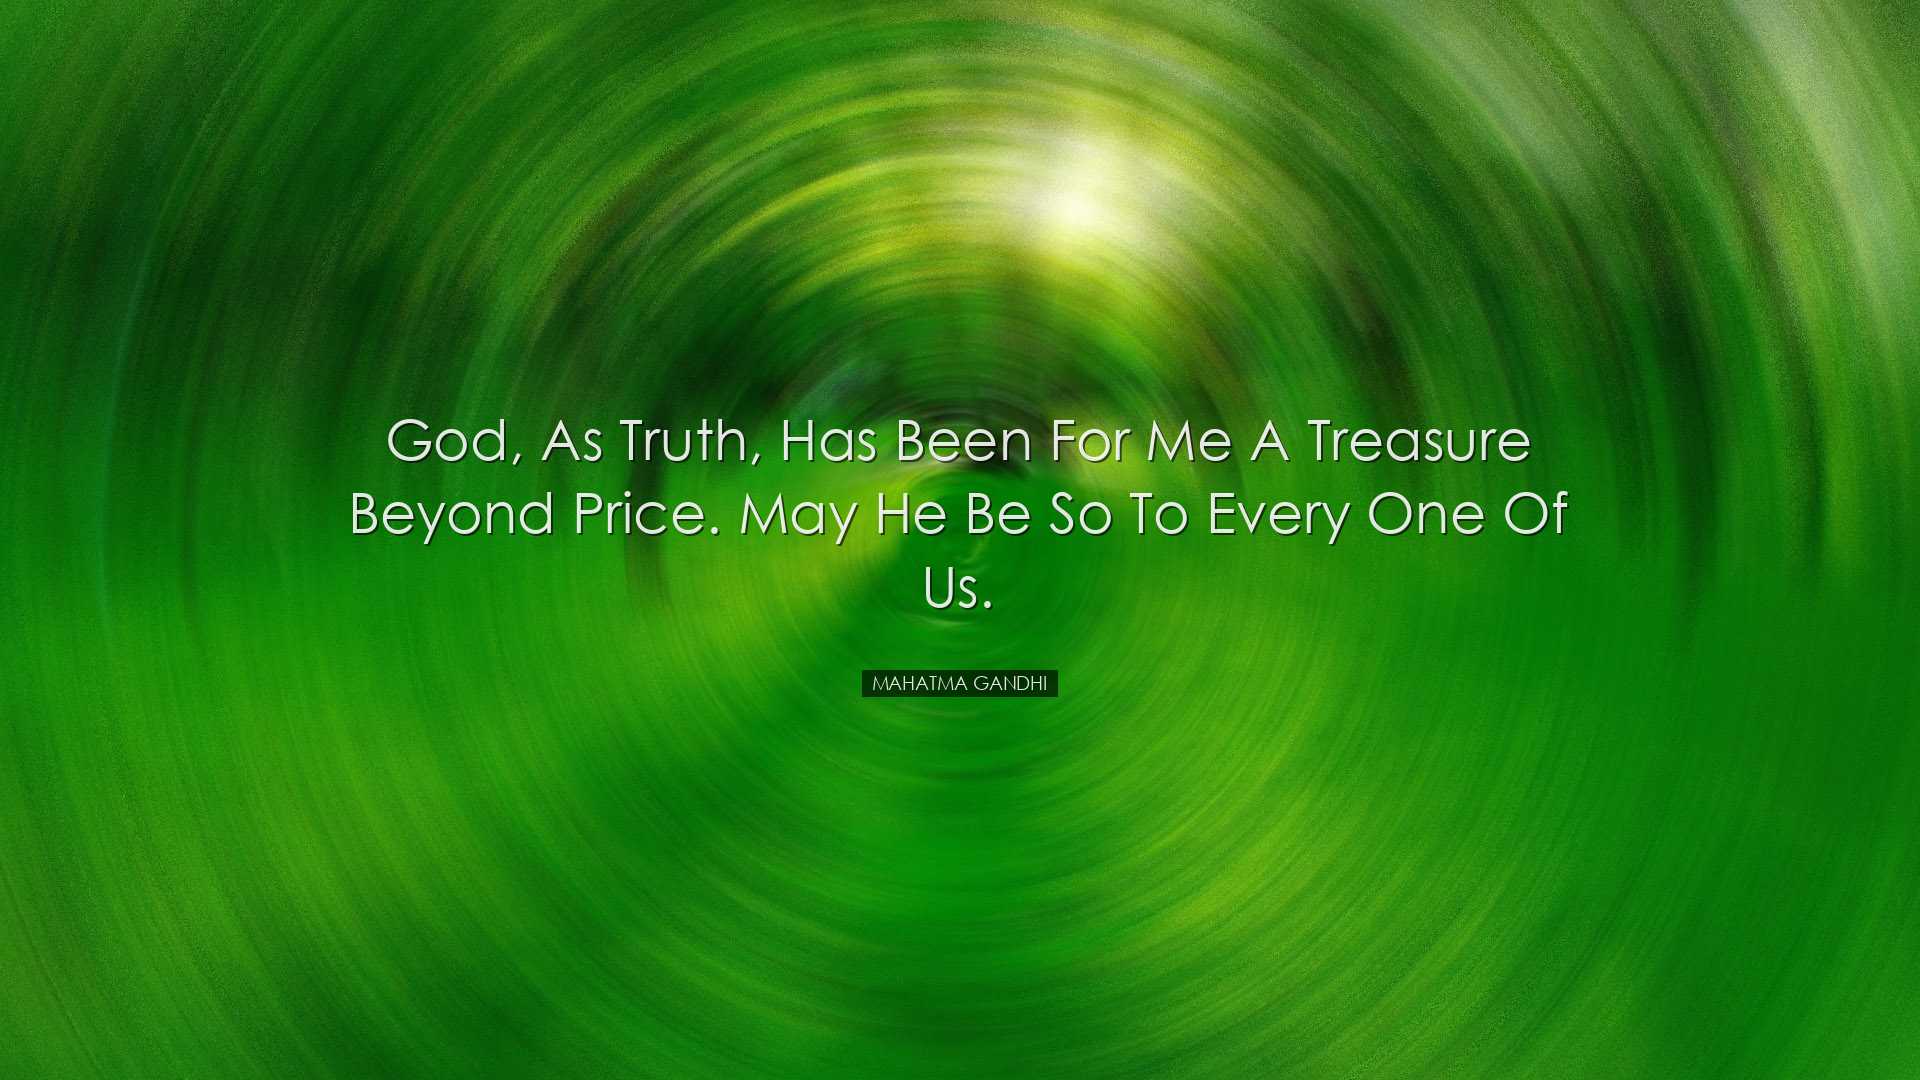 God, as Truth, has been for me a treasure beyond price. May He be